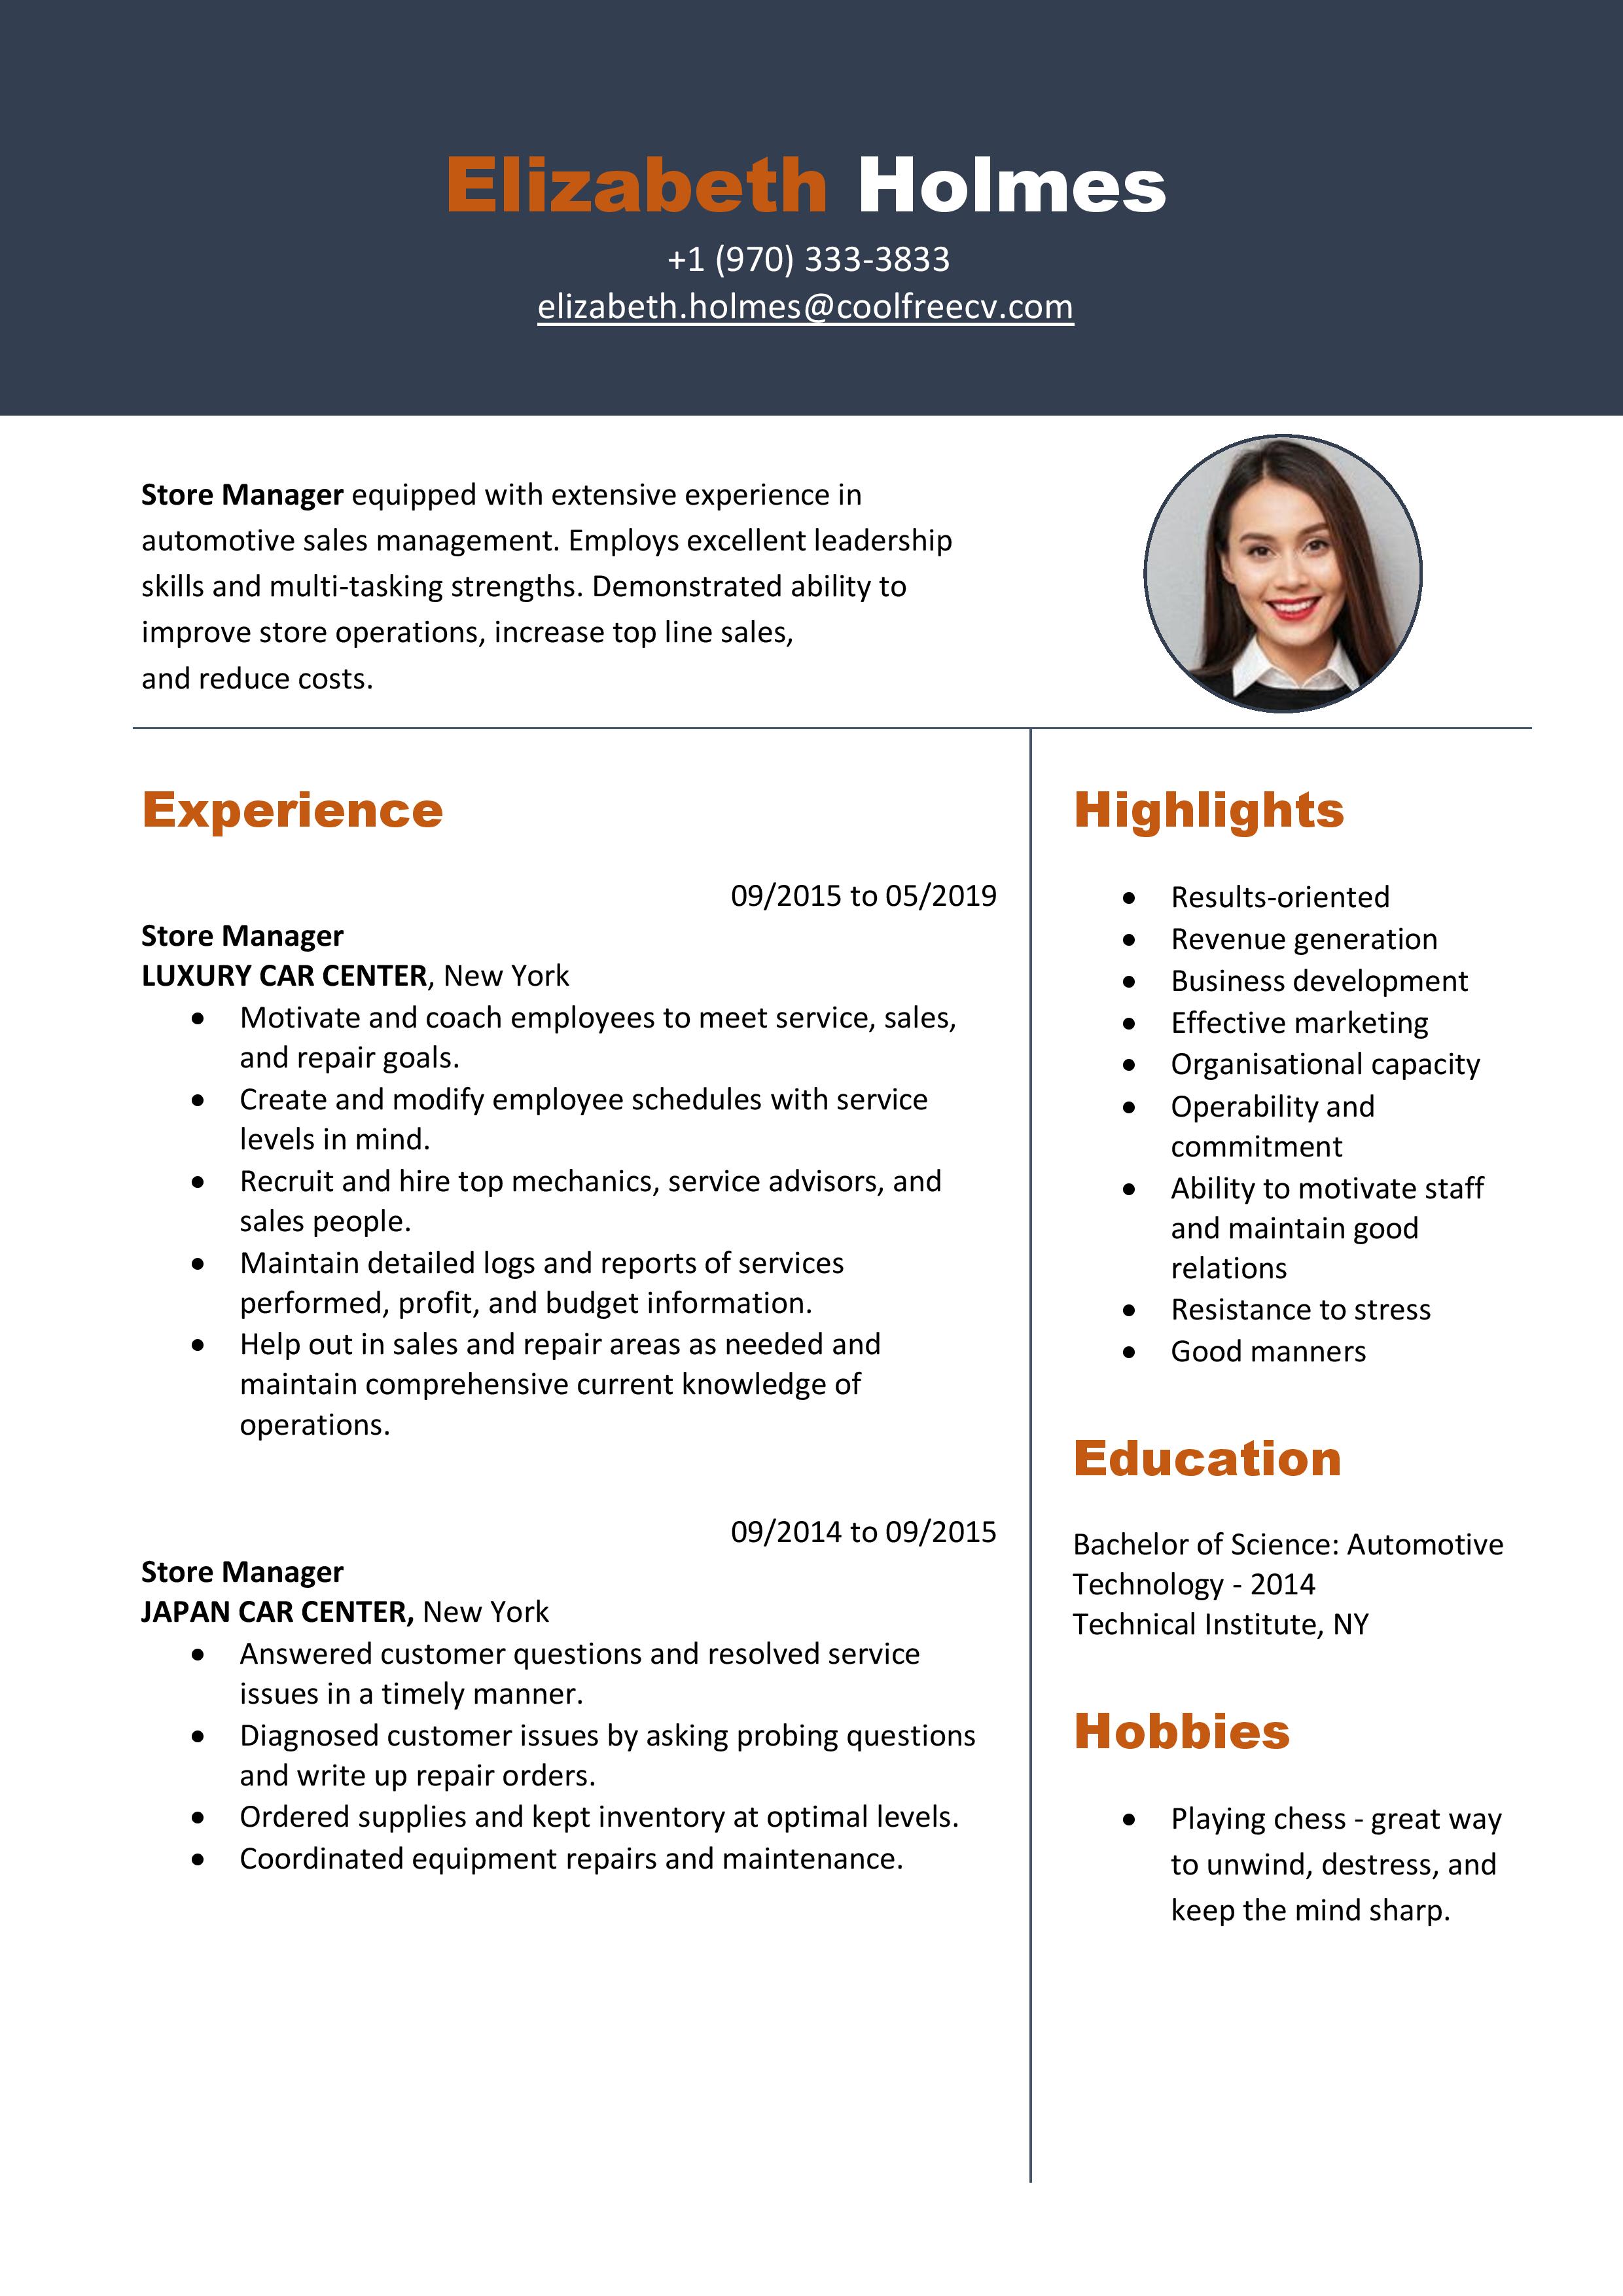 Write professional resume, cv within 18 hour by Sbk_services  Fiverr